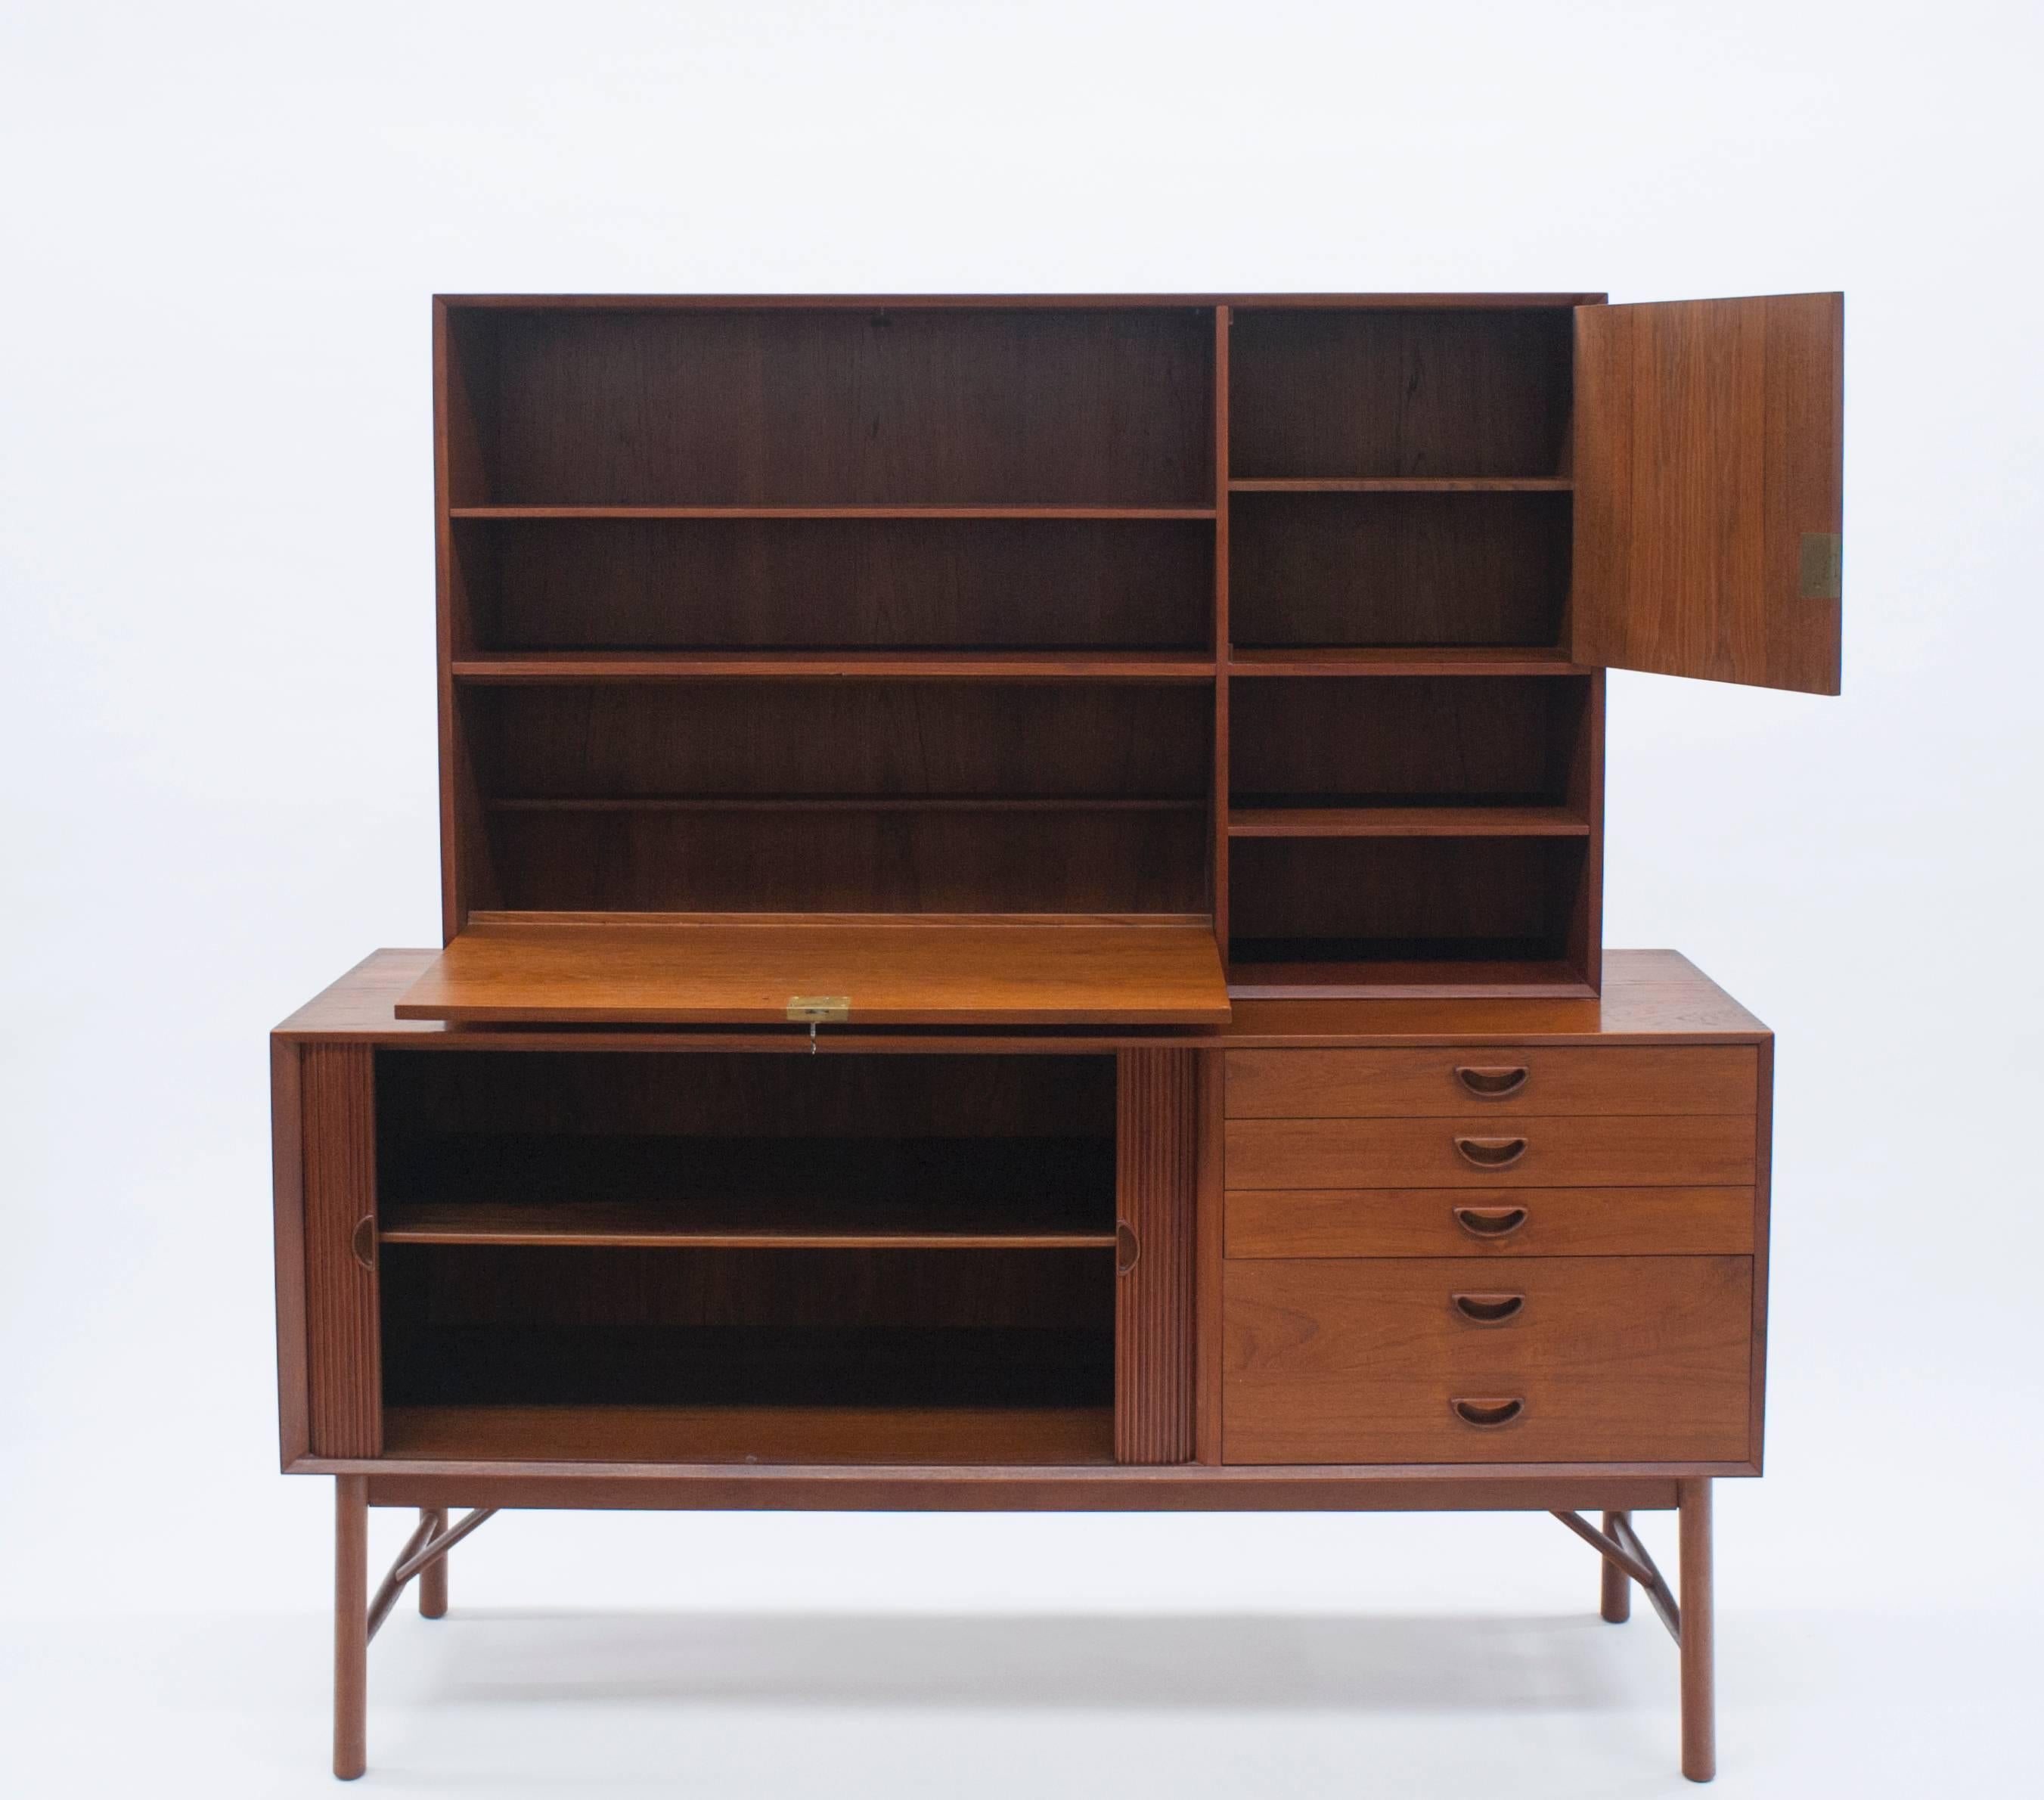 Beautiful and highly functional sideboard with hard to find locking dry bar. This exceptional set is quality made from solid teak with exposed finger joined details. Tambour door opens smoothly to reveal one adjustable shelf with plenty of storage